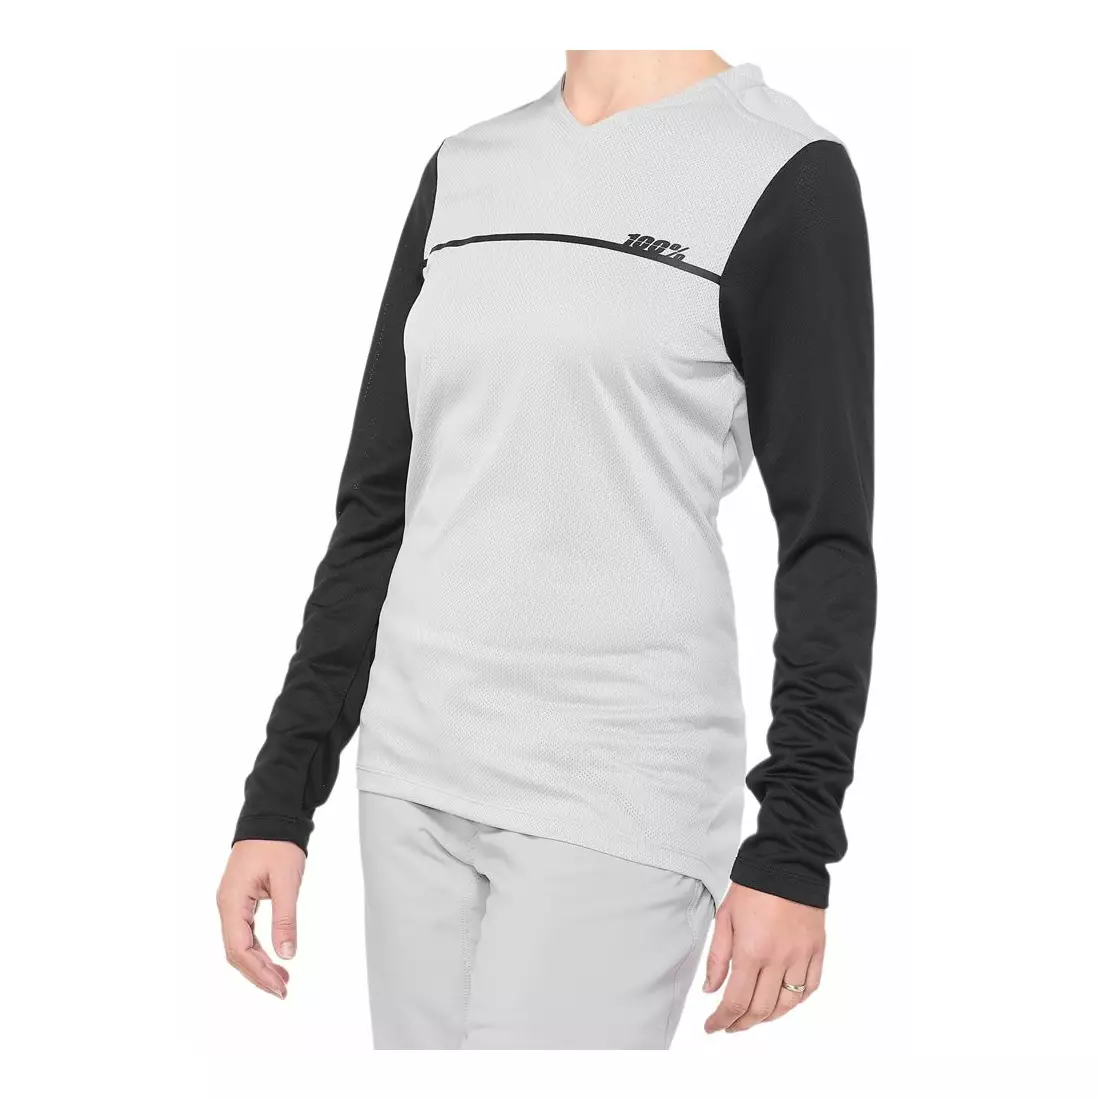 100% women's cycling jersey with long sleeves RIDECAMP grey black STO-44402-245-12